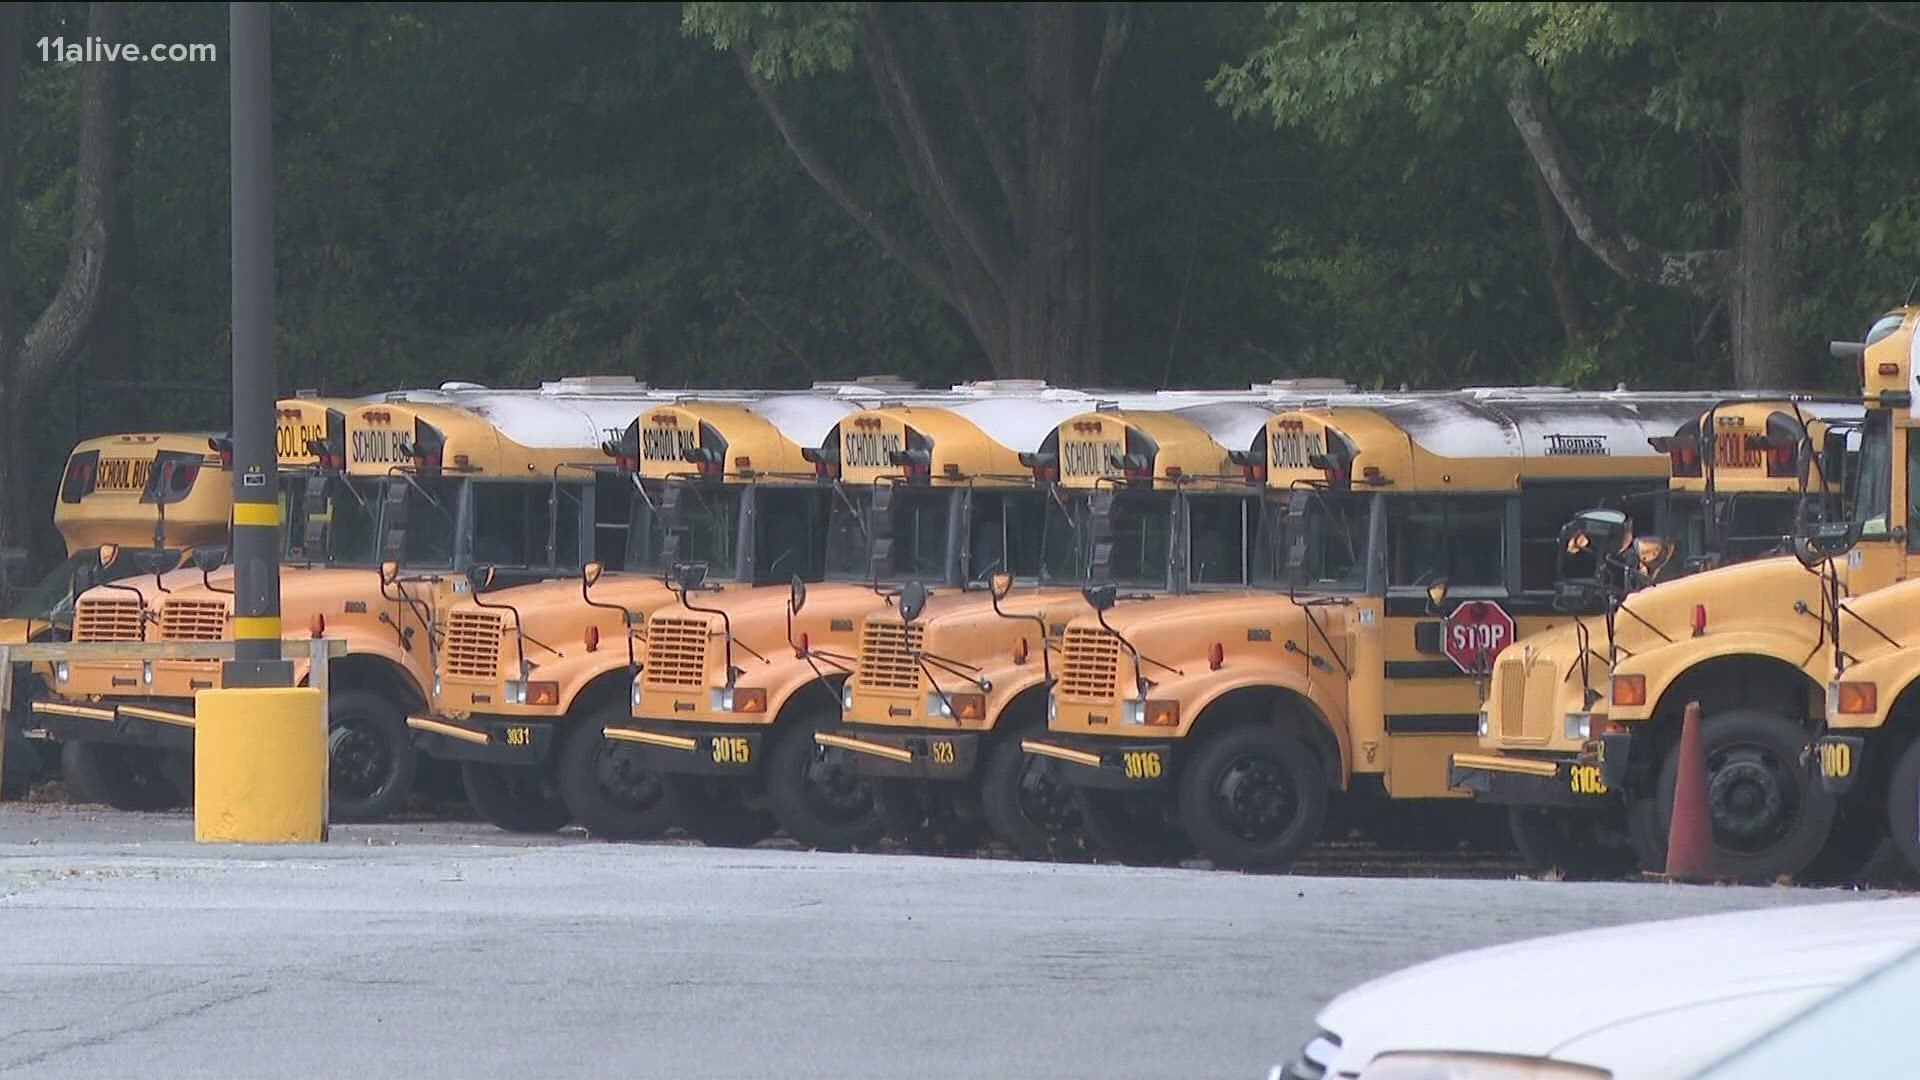 There are bus driver shortages around the country. Here is how DeKalb County Schools is working to get more hired.